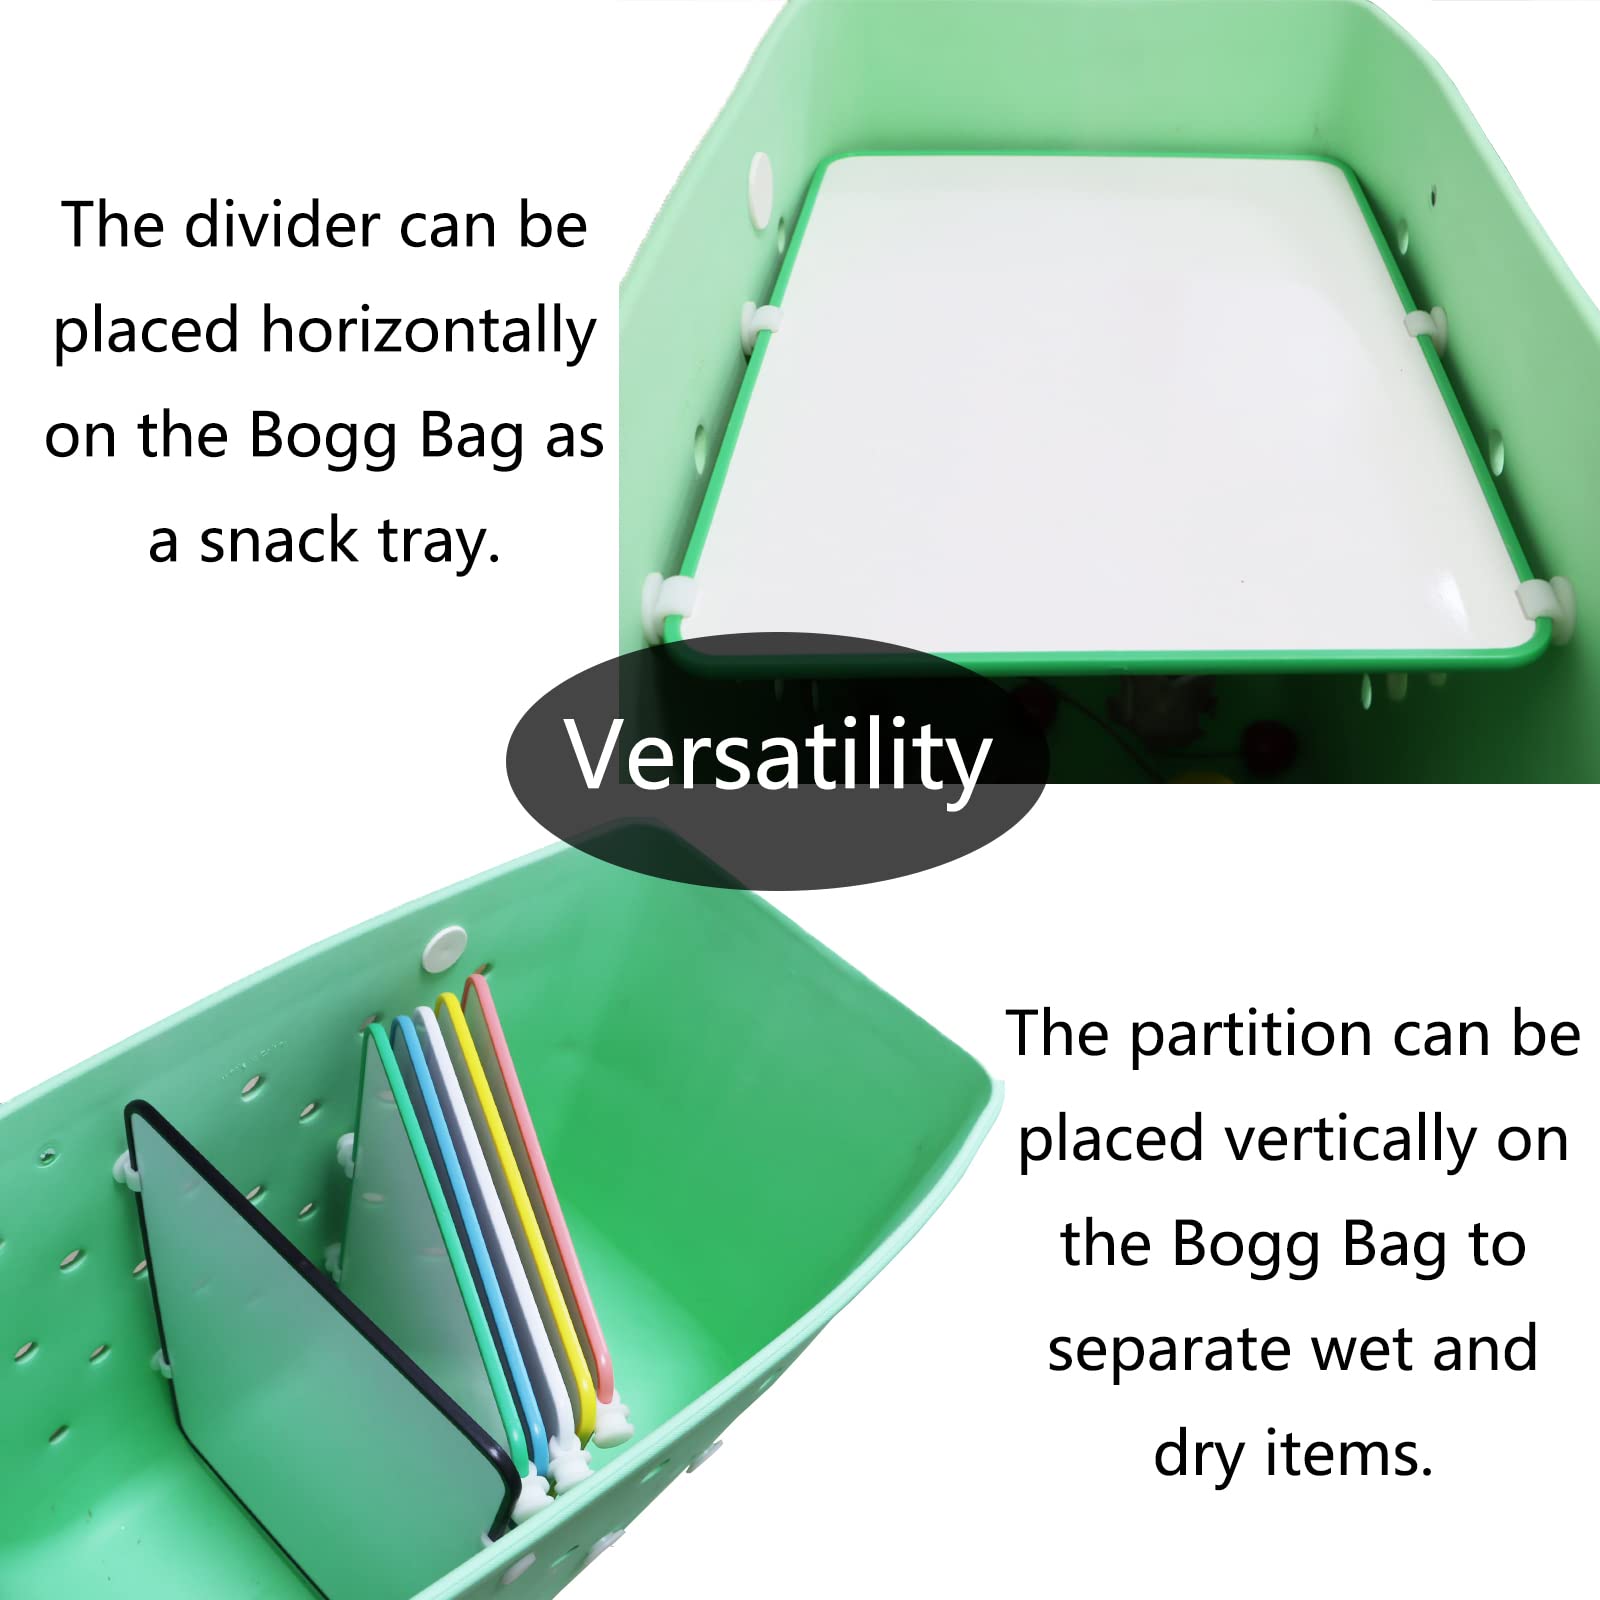 TEYOUYI Divider Tray for Bogg Bag Accessories for Bogg Bags compatible with BOGG BAG Original X Large Help with Organizing your Bogg Bag and Divide Space 2pcs Black